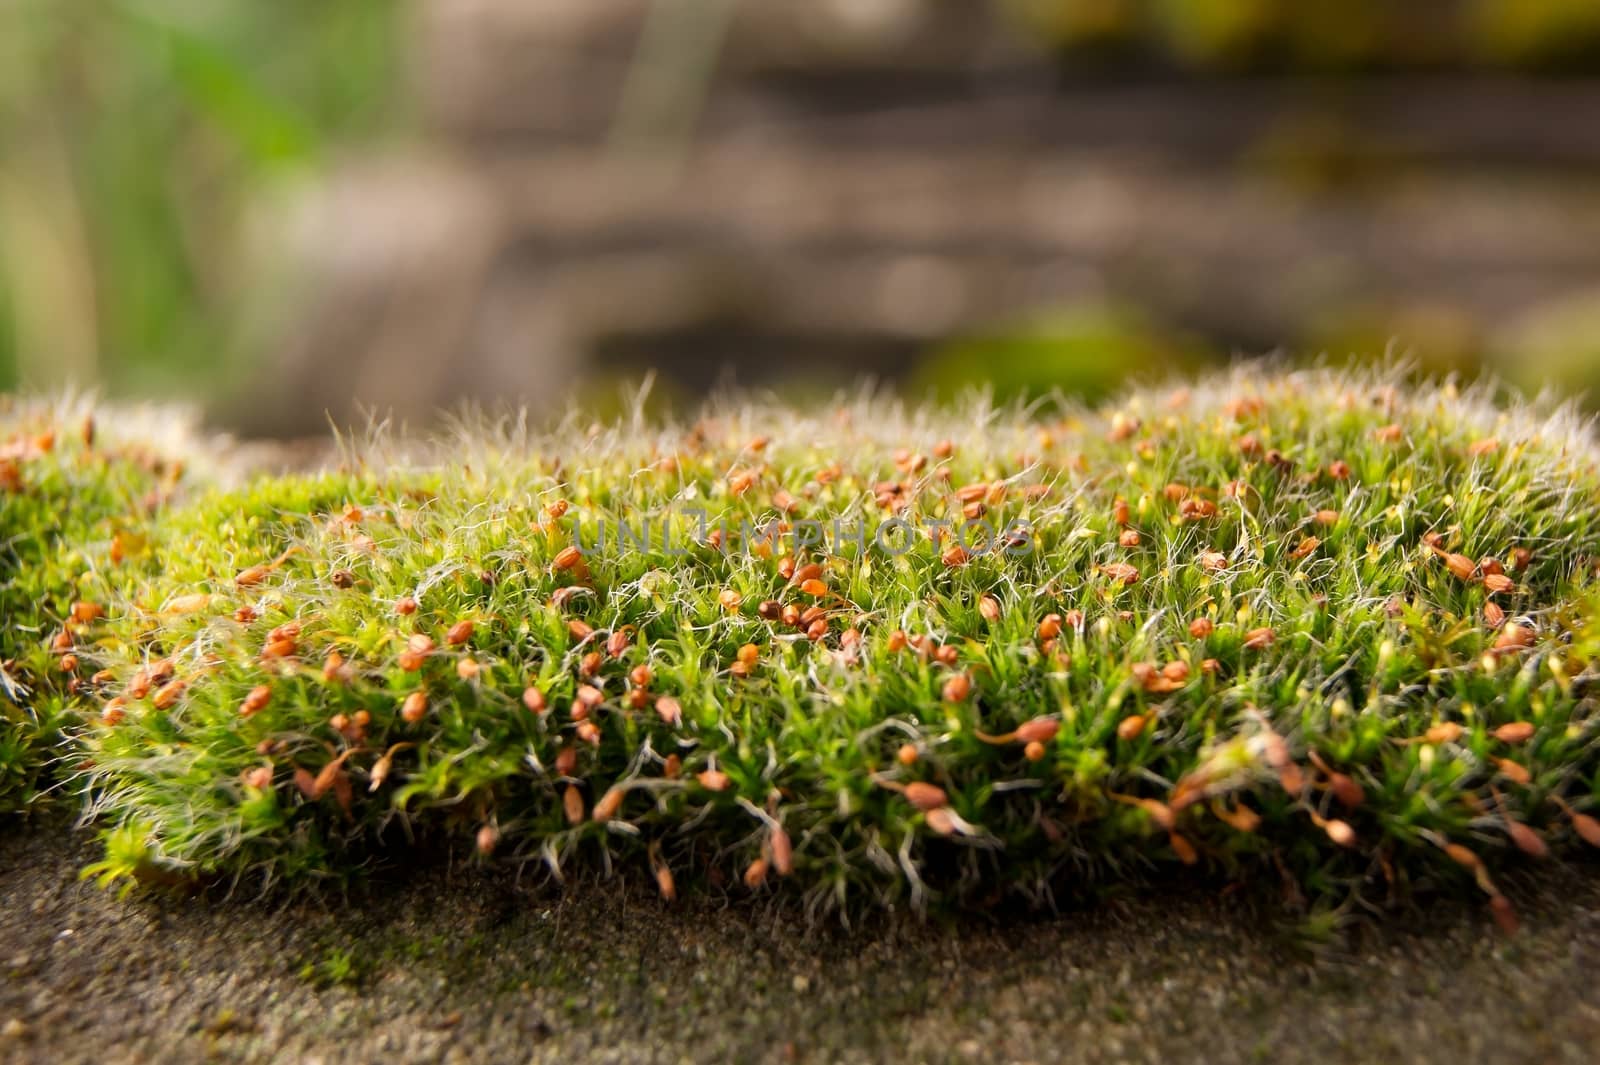 The flowering moss on the bottom of the forest.